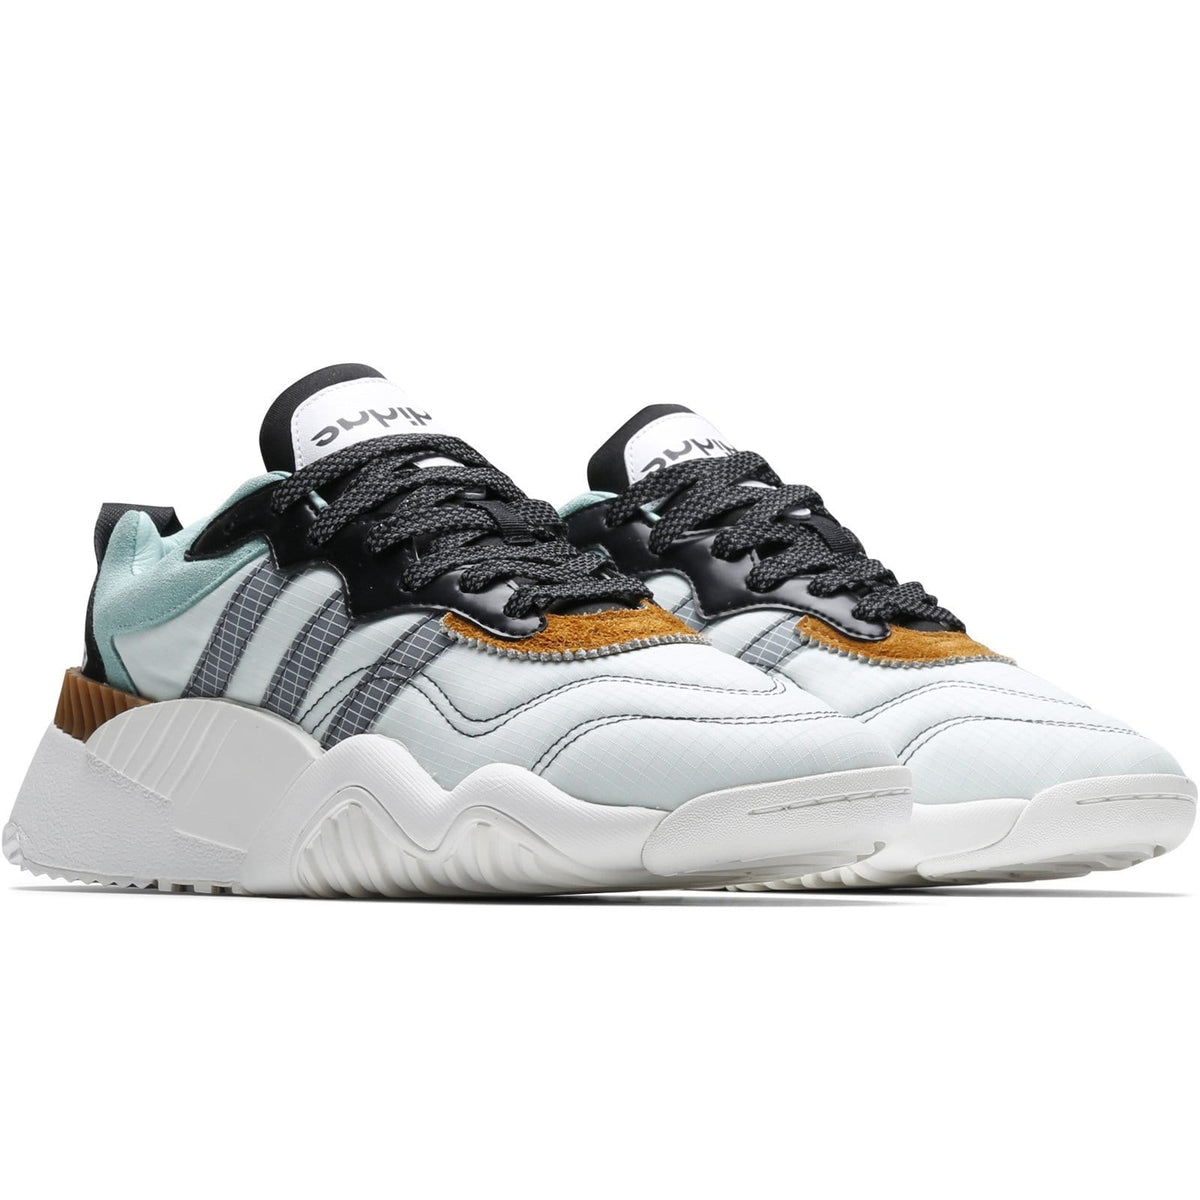 adidas aw turnout trainer alexander wang